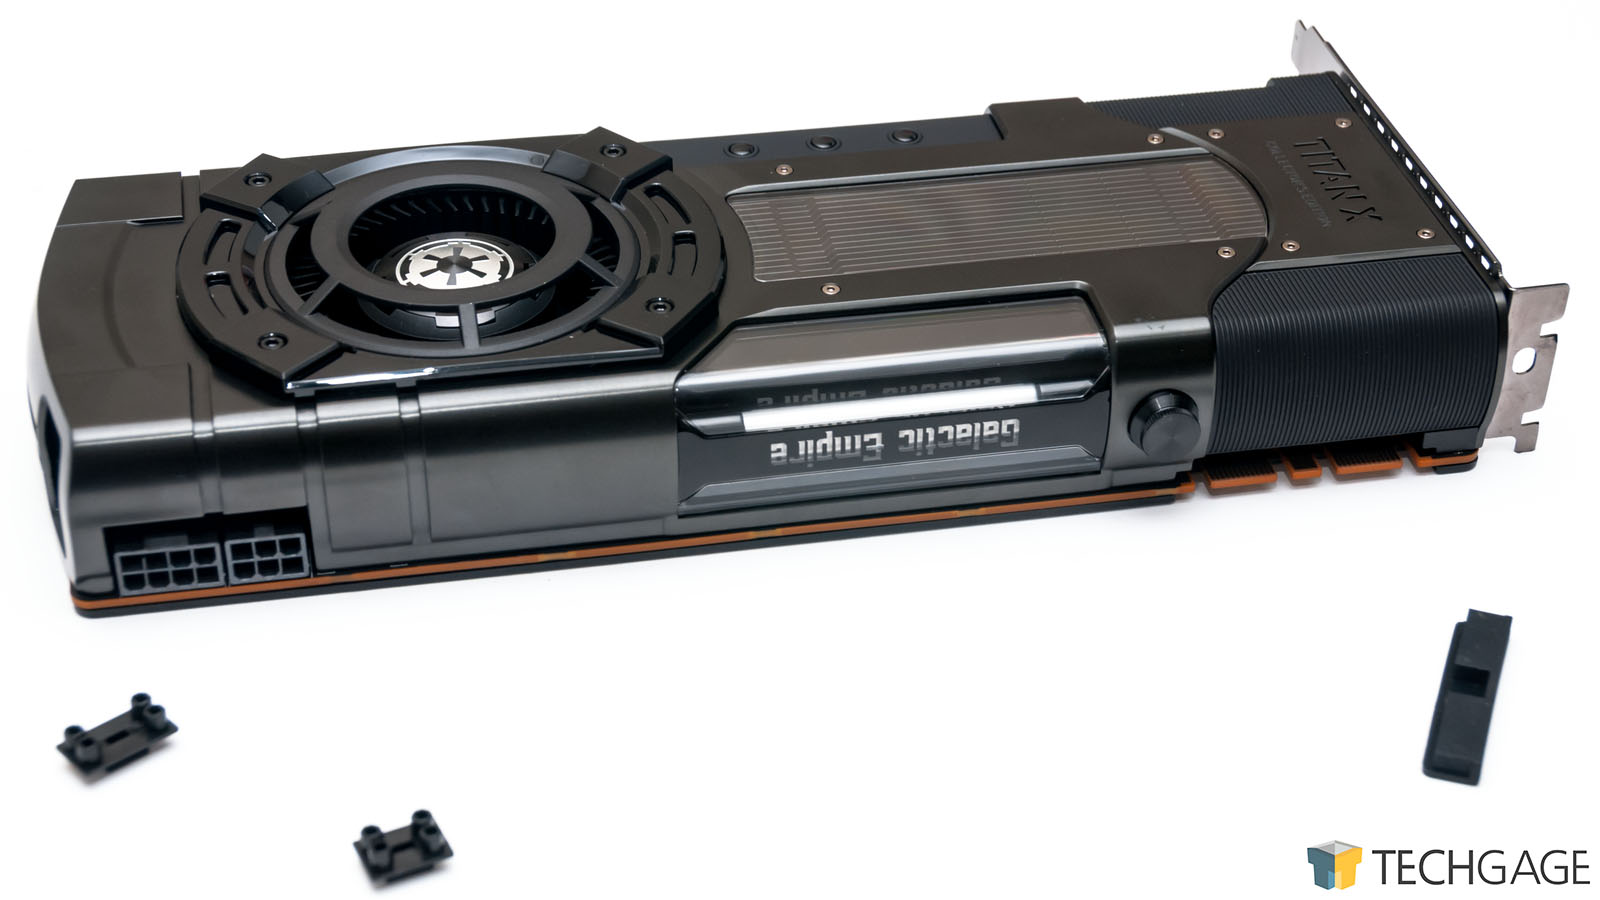 Hands-on With NVIDIA's TITAN Xp Star Wars 'Galactic Edition' Graphics Card  – Techgage